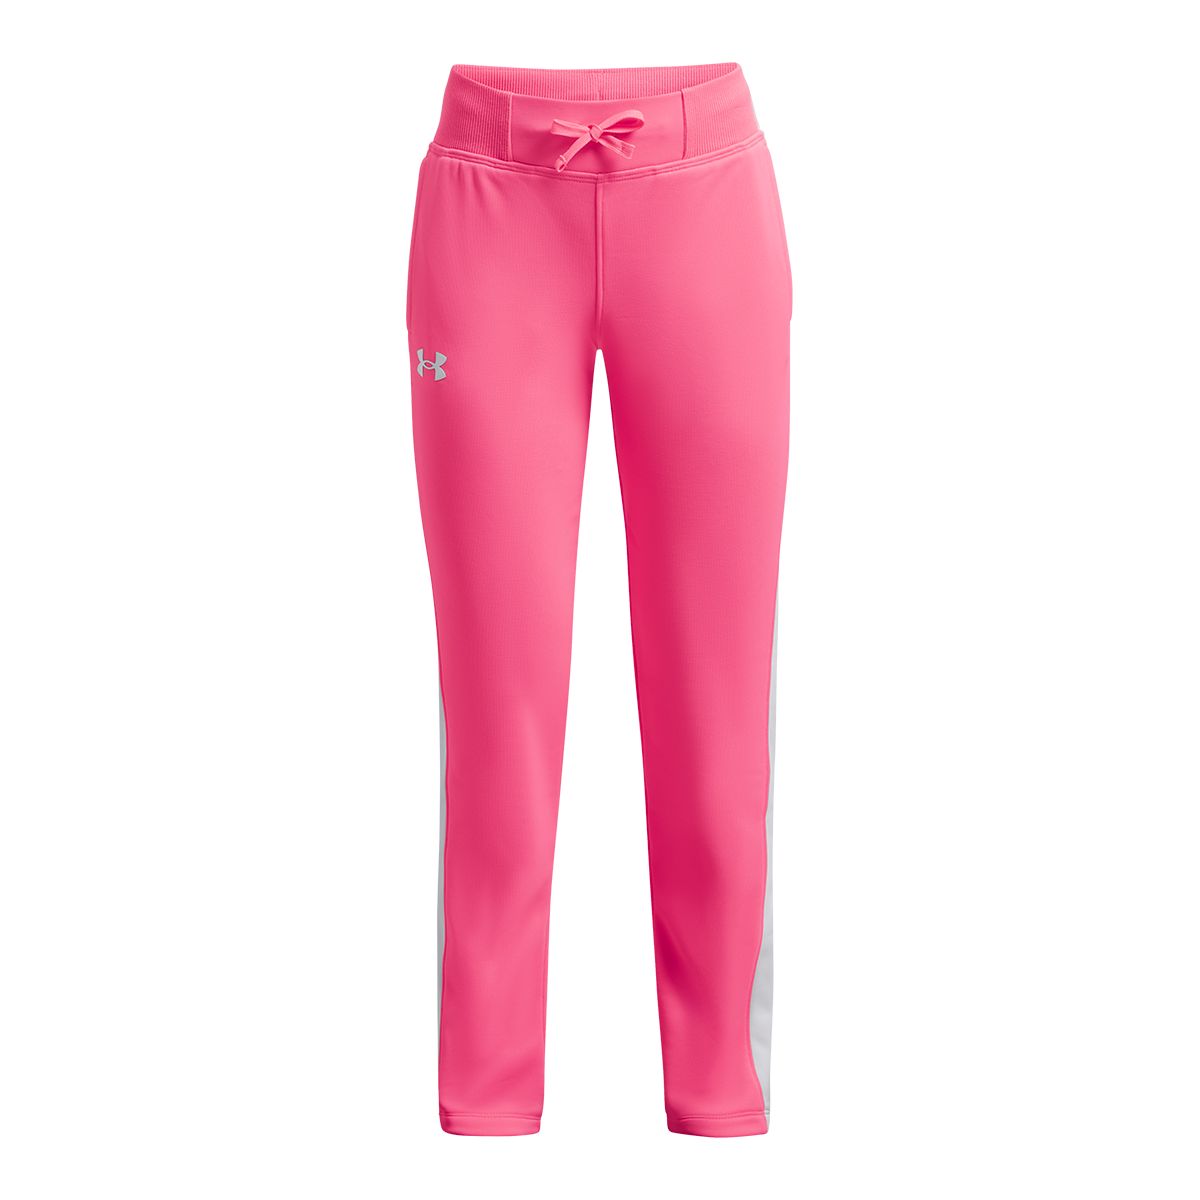 Under Armour Girls' Armour Fleece Leggings, Kids', Loose, Polyester,  Athletic